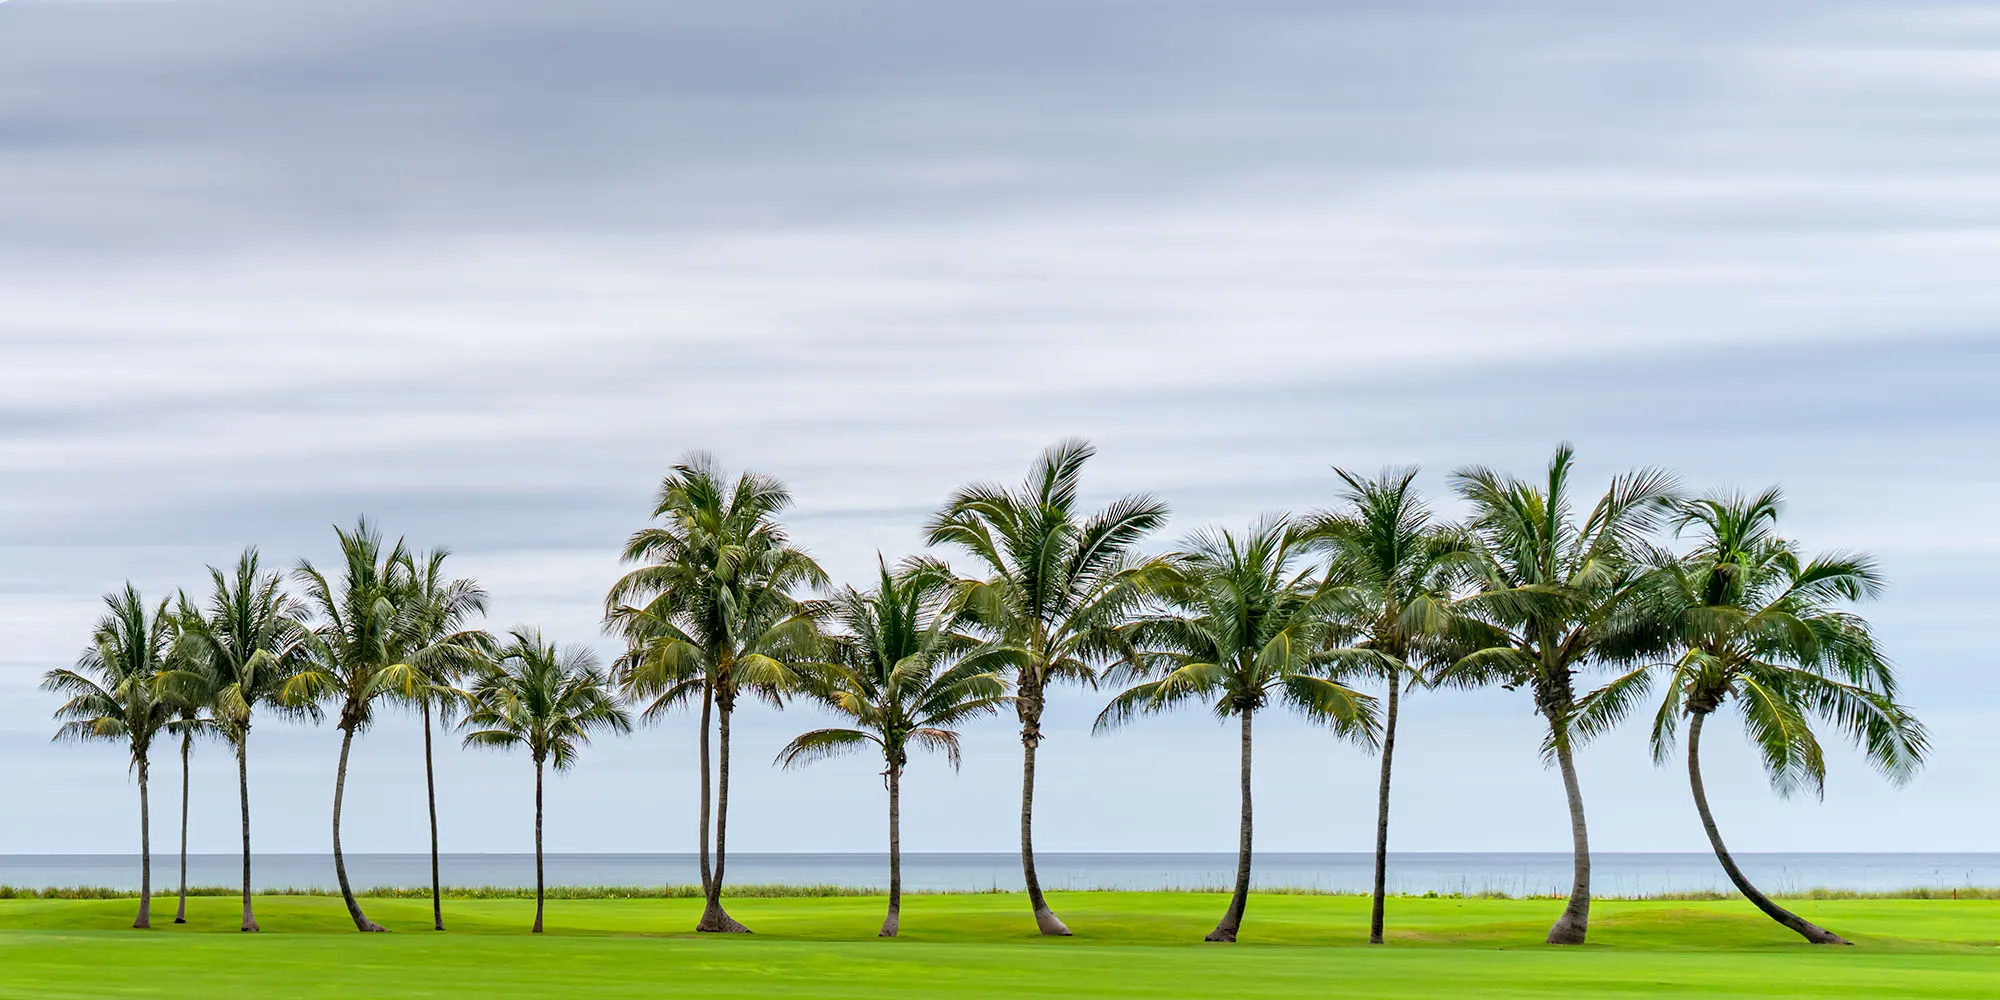 Palm trees in green grass field with cloudy background.